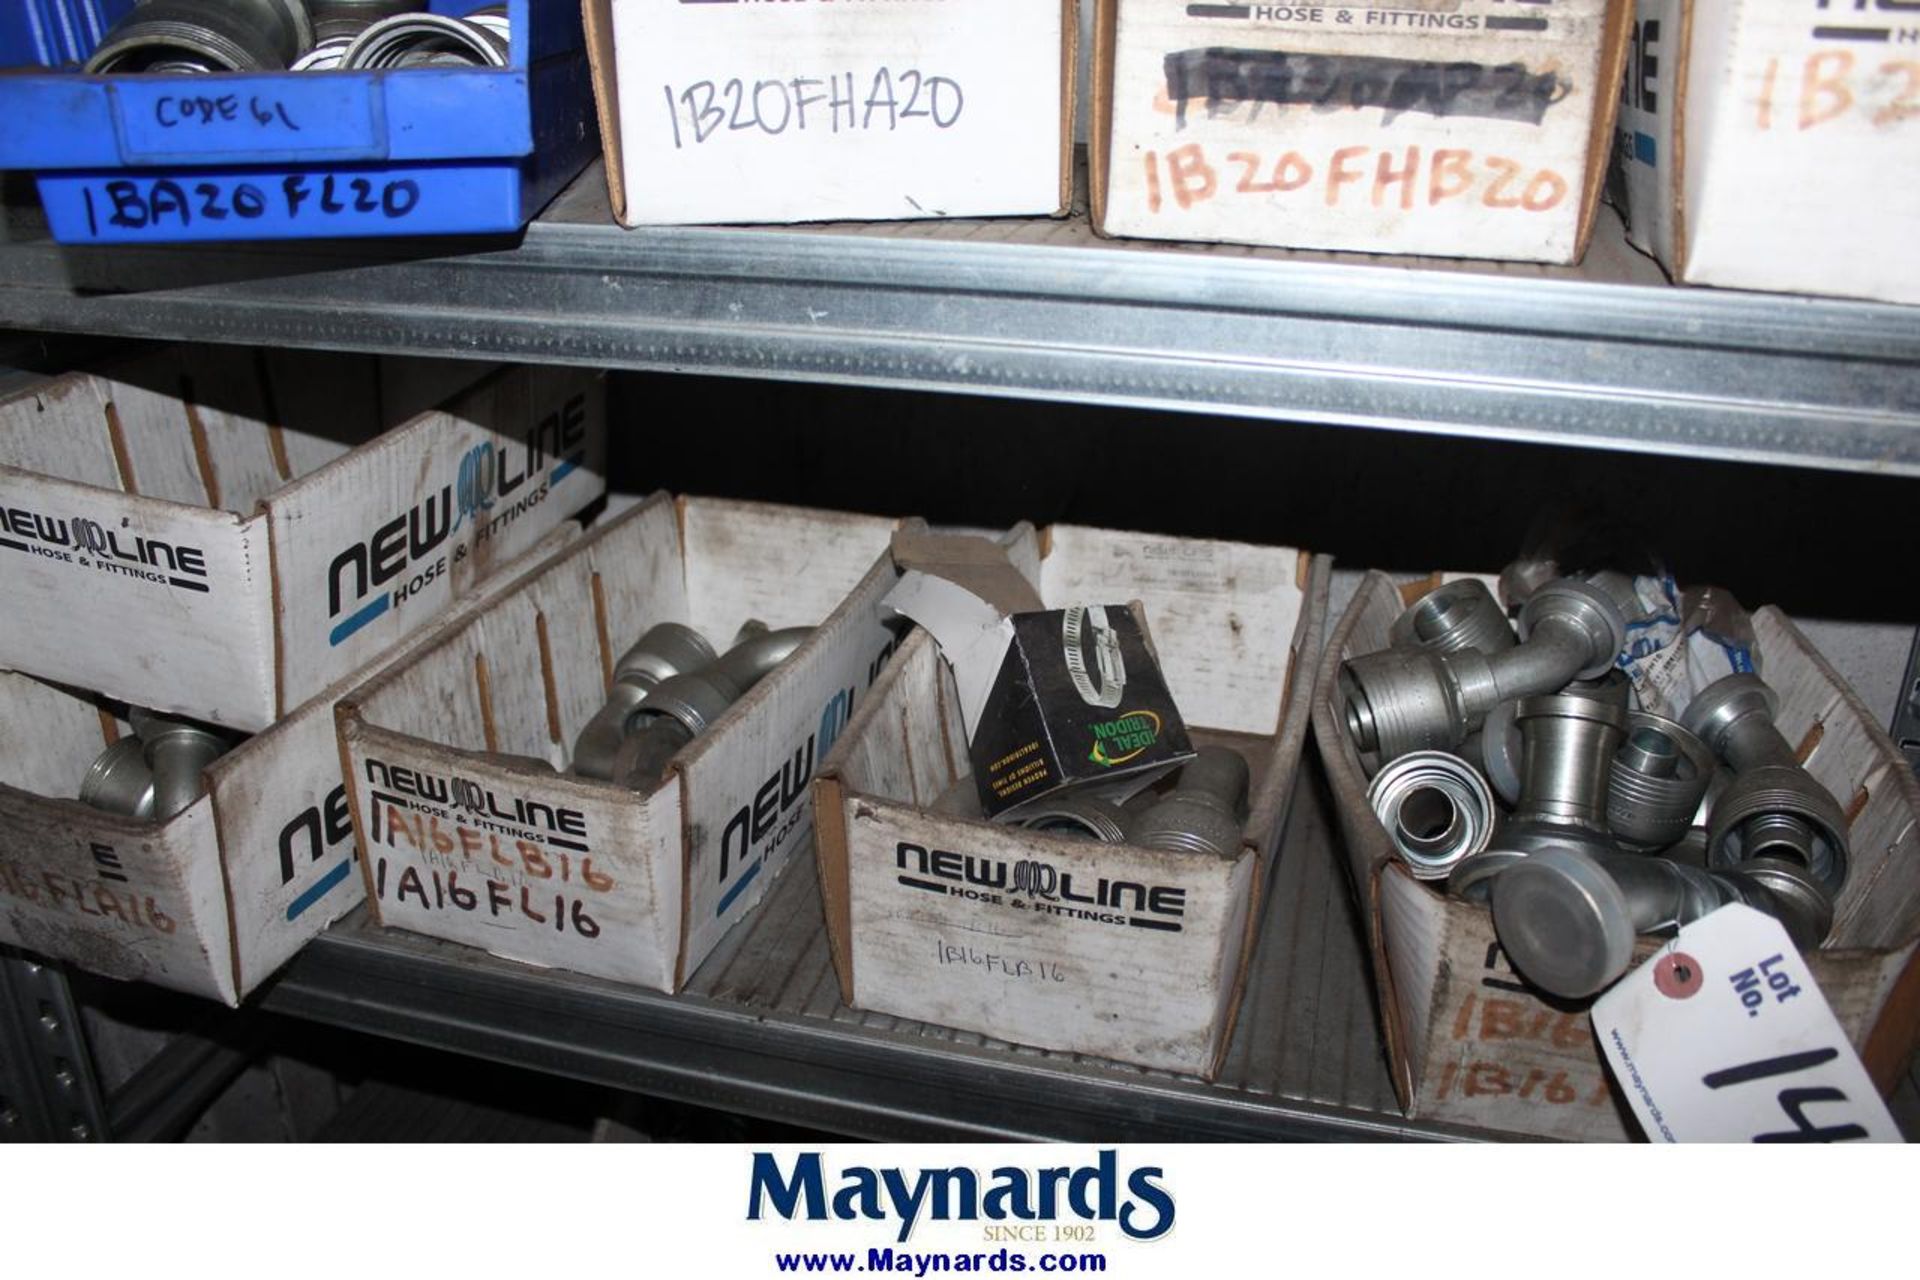 lot of hydraulic fittings on shelf - Image 3 of 5